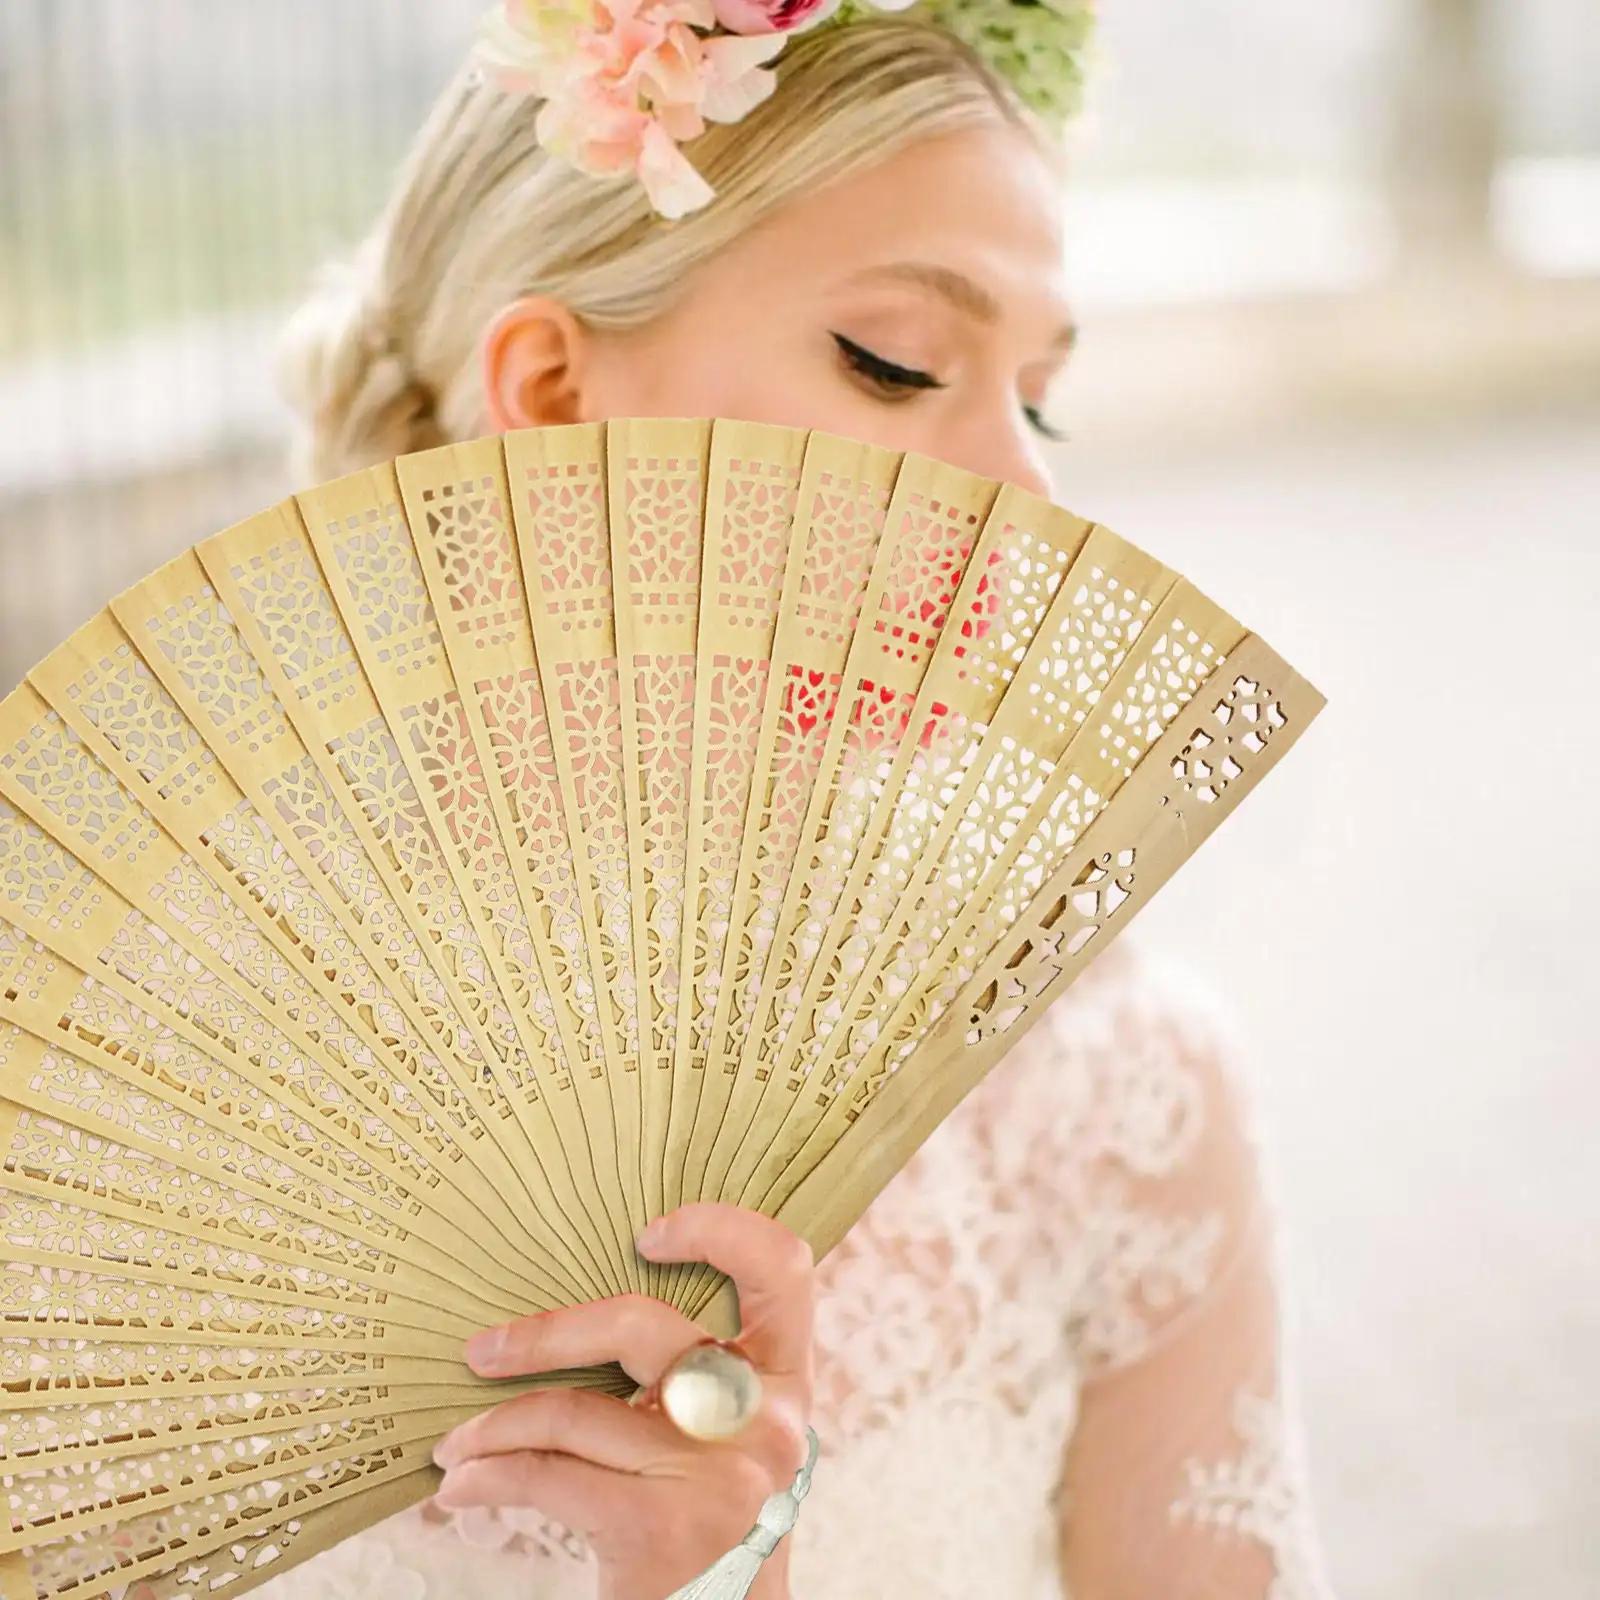 High Quality Wooden Hand Fans Wooden Style Fan With A Tassel Hollow-Out Hand Held Fan With Best Prices